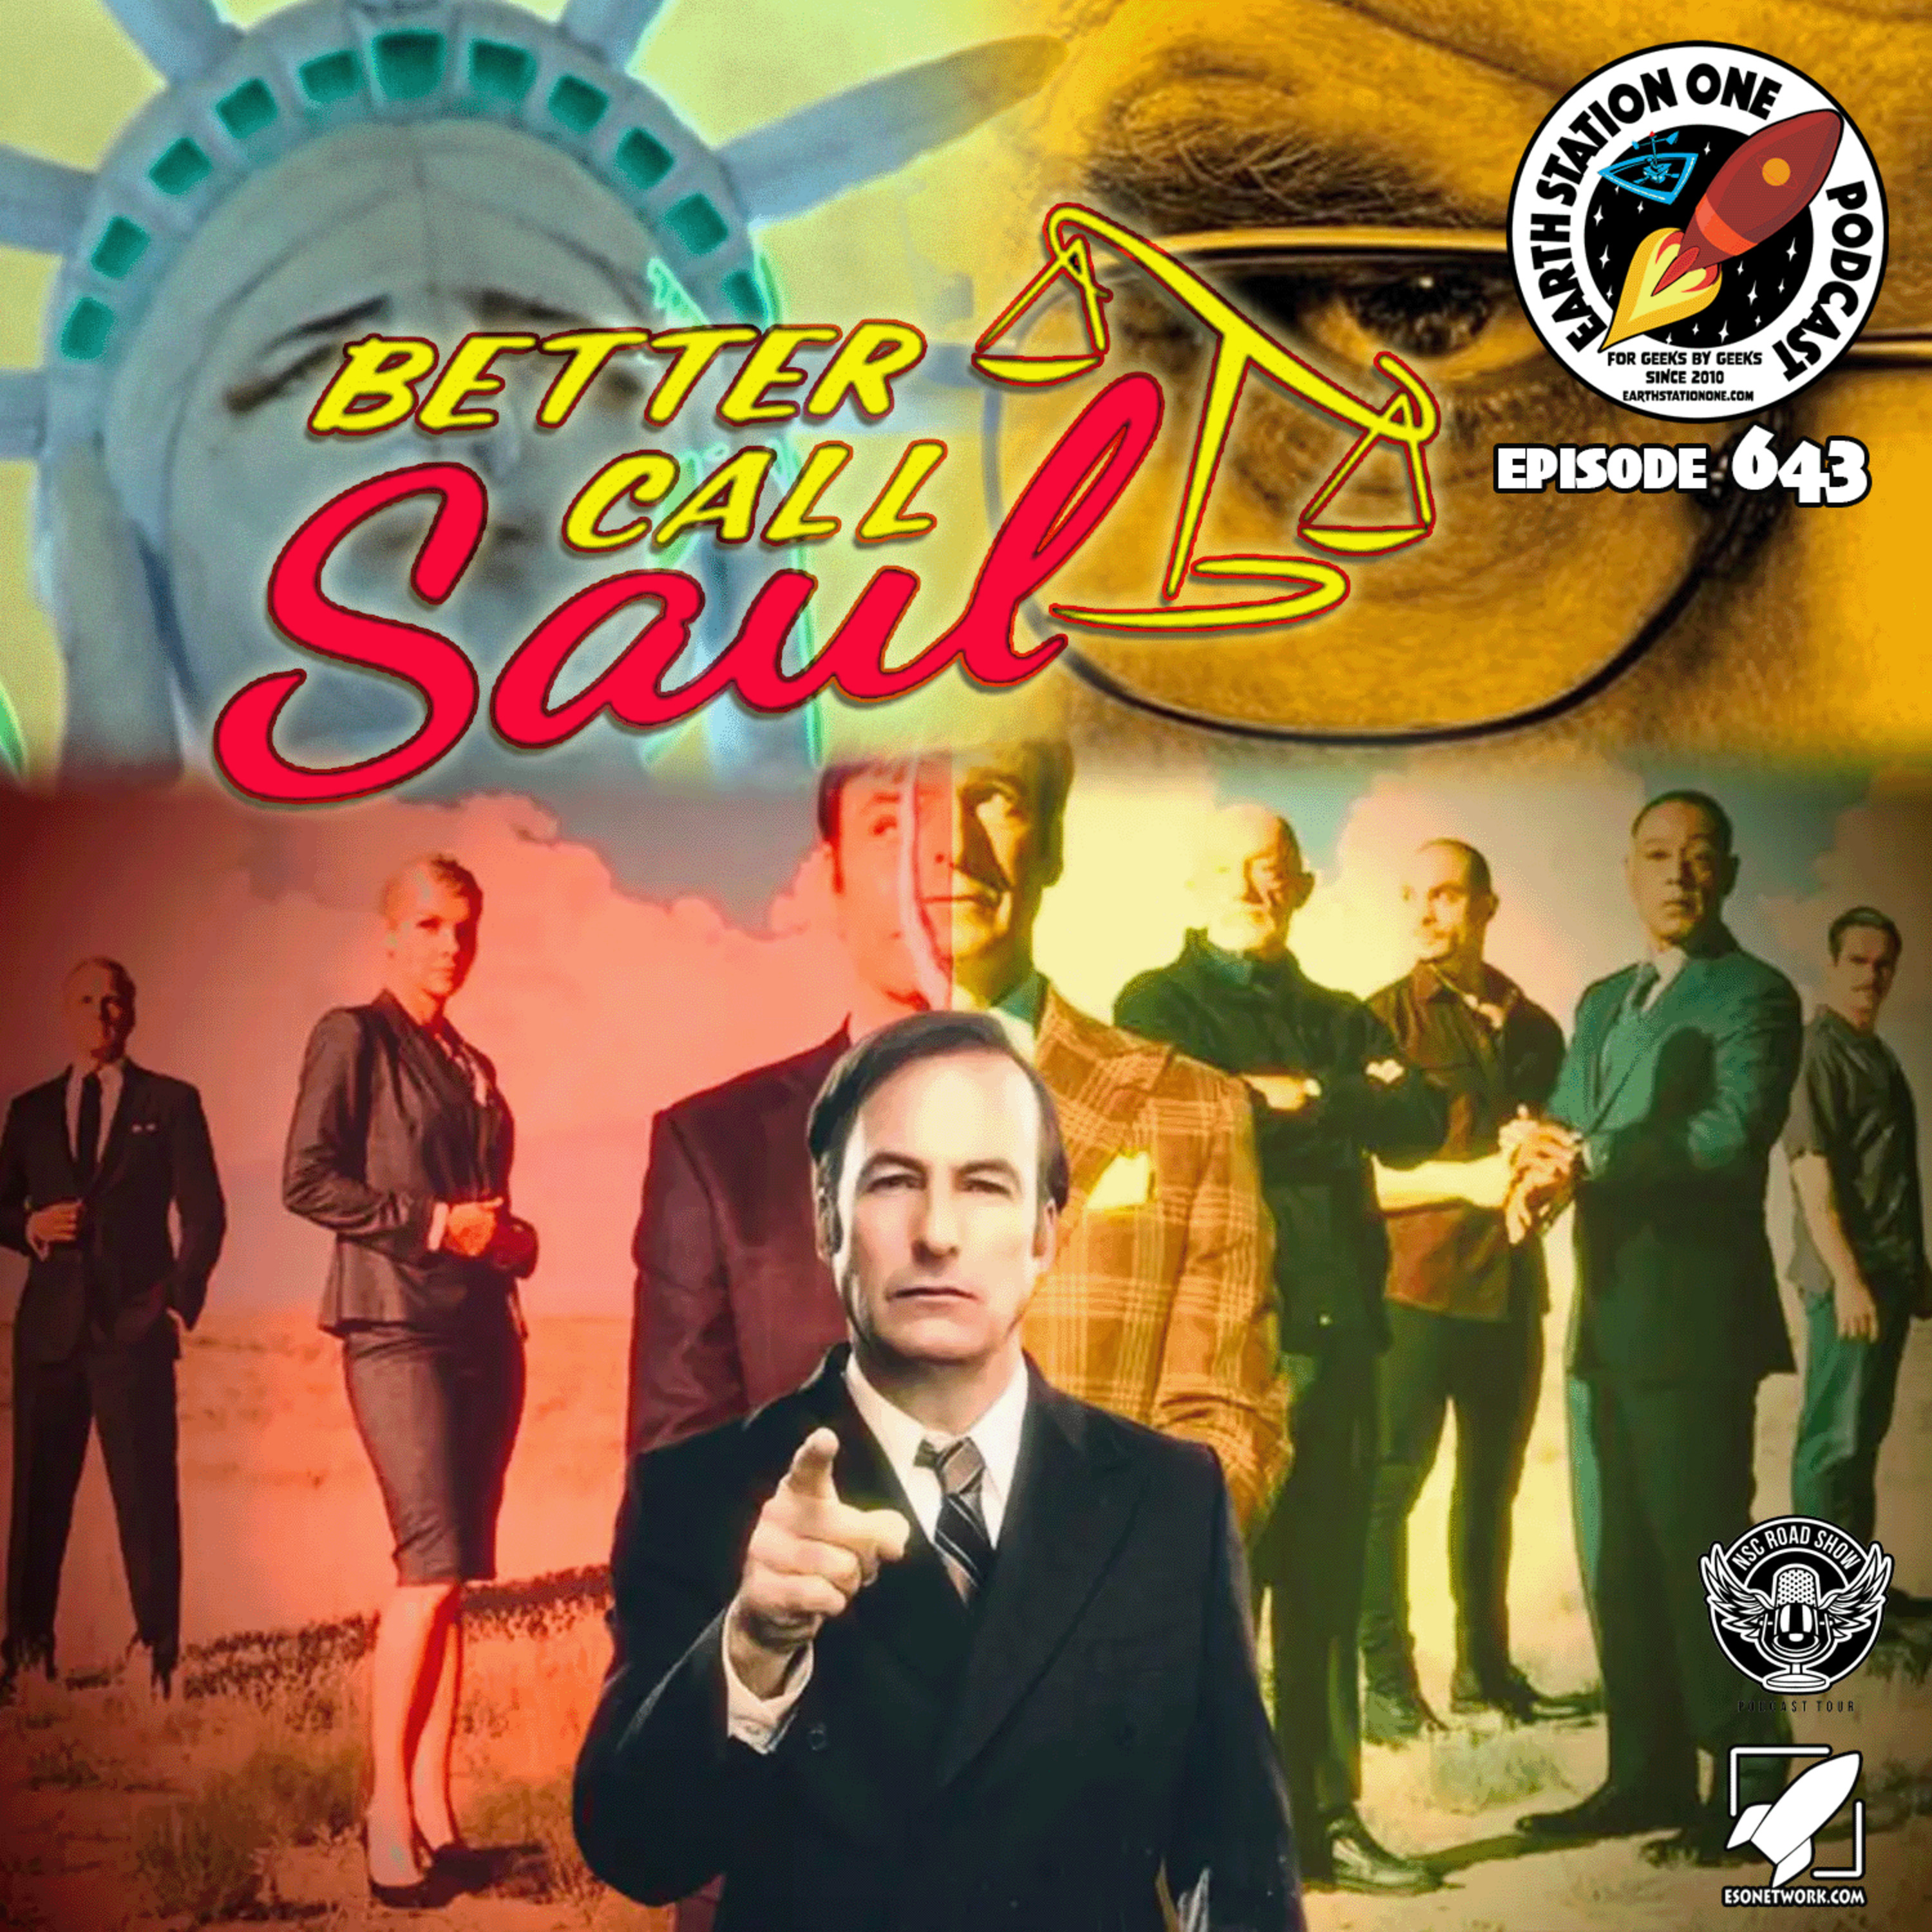 The Earth Station One Podcast - Better Call Saul